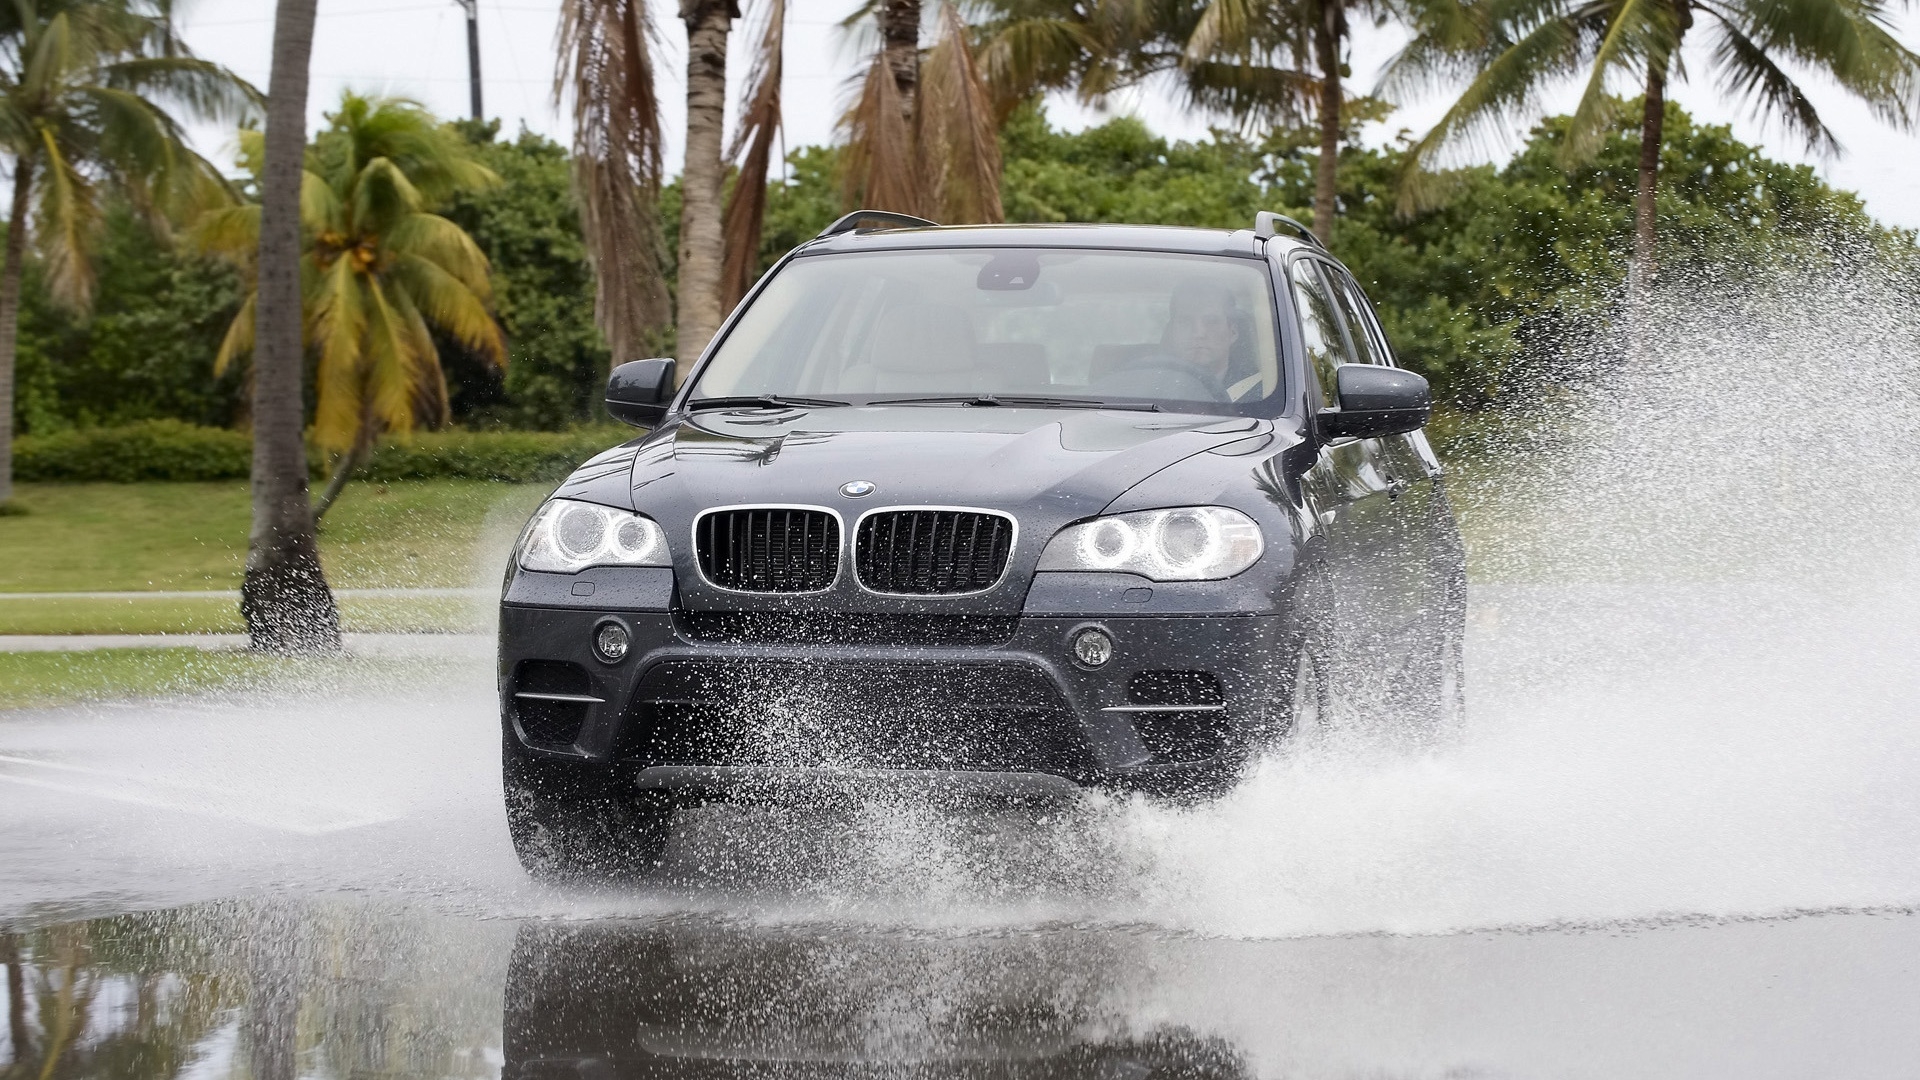 BMW X5 Water 2010 for 1920 x 1080 HDTV 1080p resolution